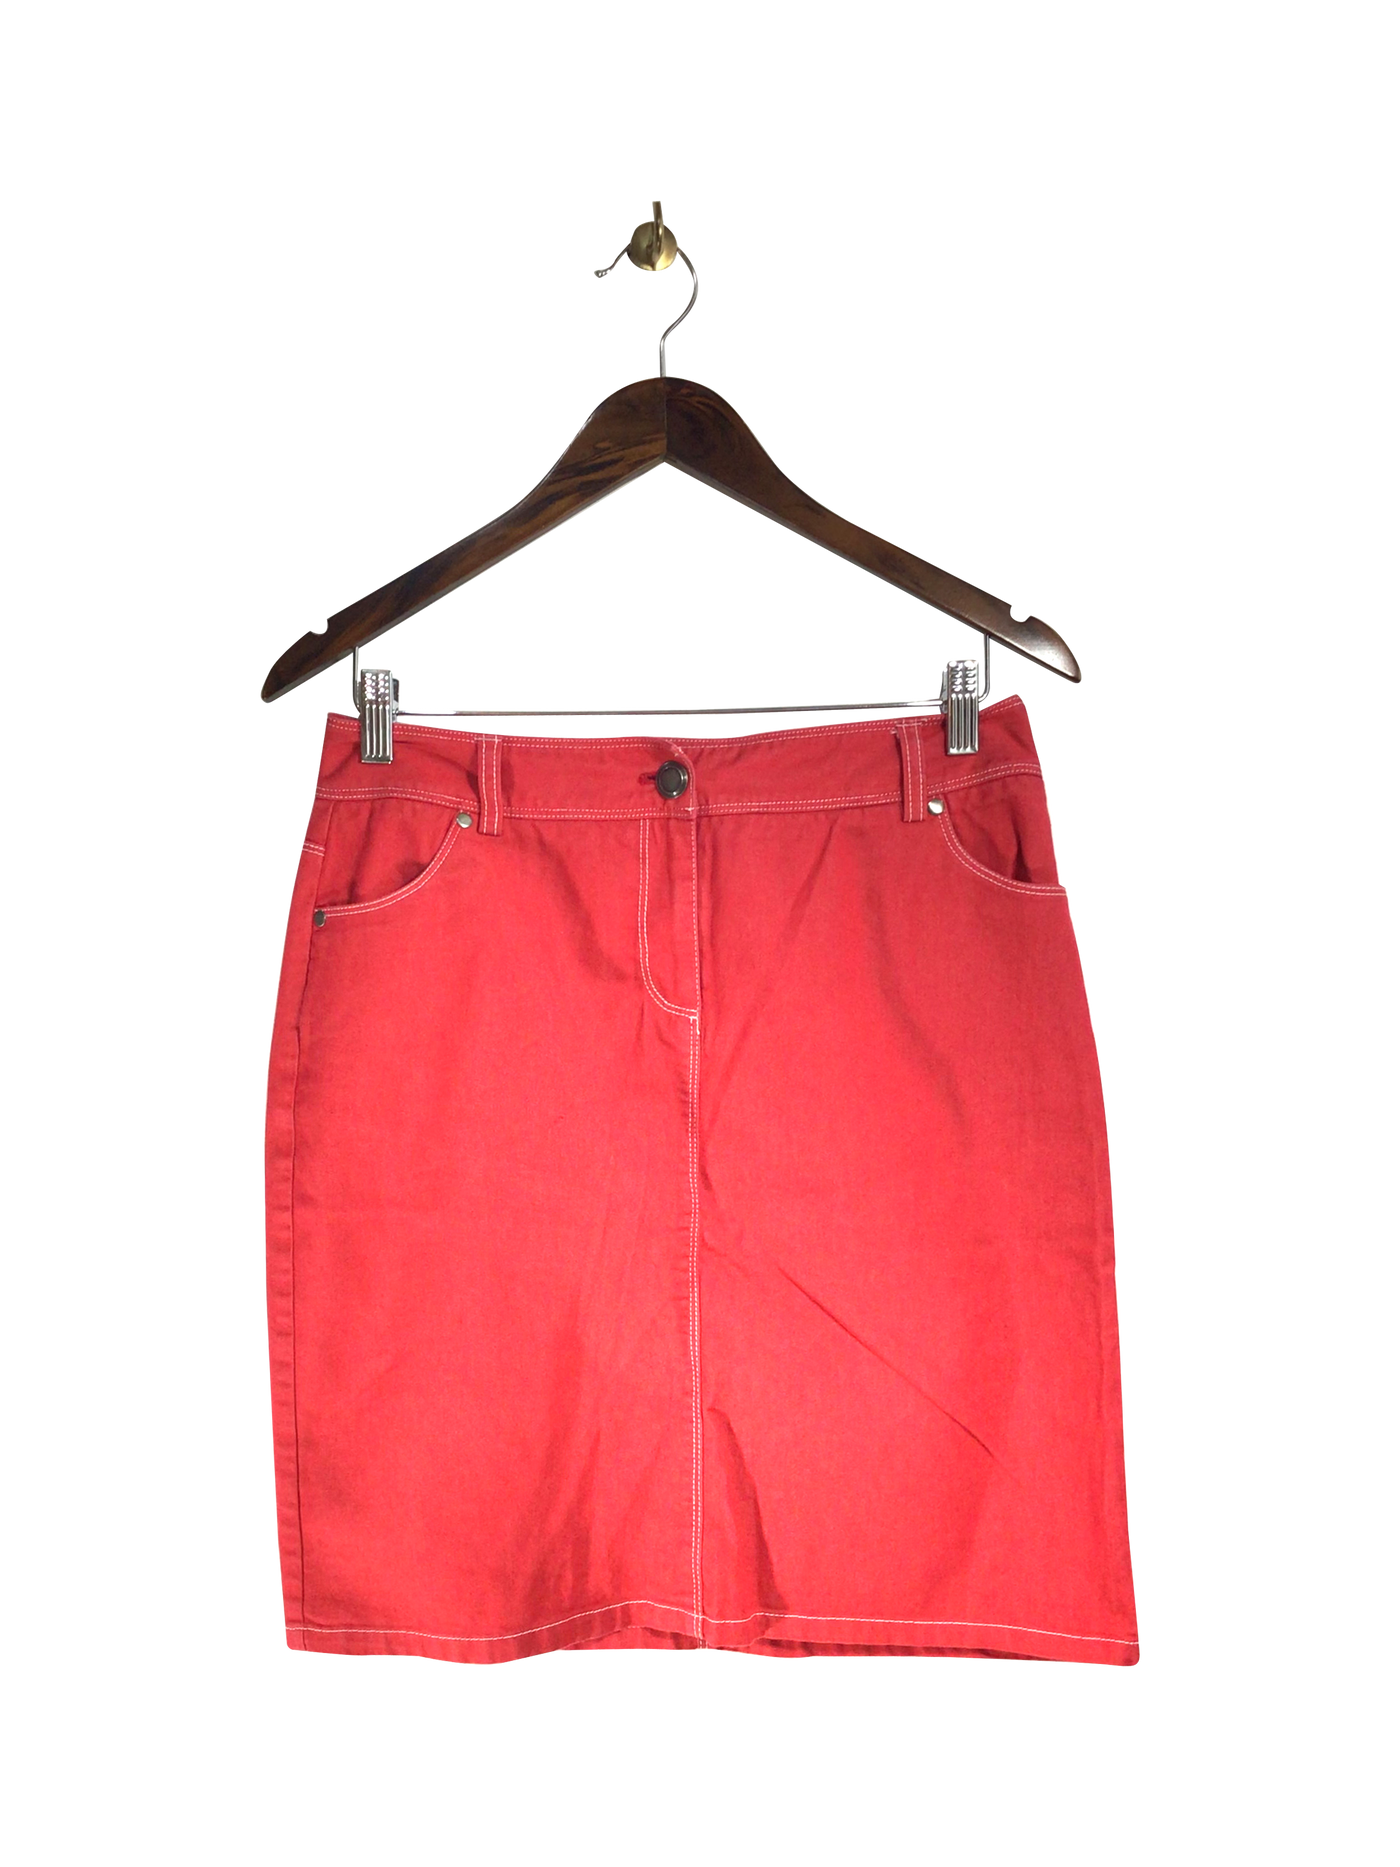 NEW YORK CLOTHING CO. Women Casual Skirts Regular fit in Pink - Size 6 | 6.04 $ KOOP